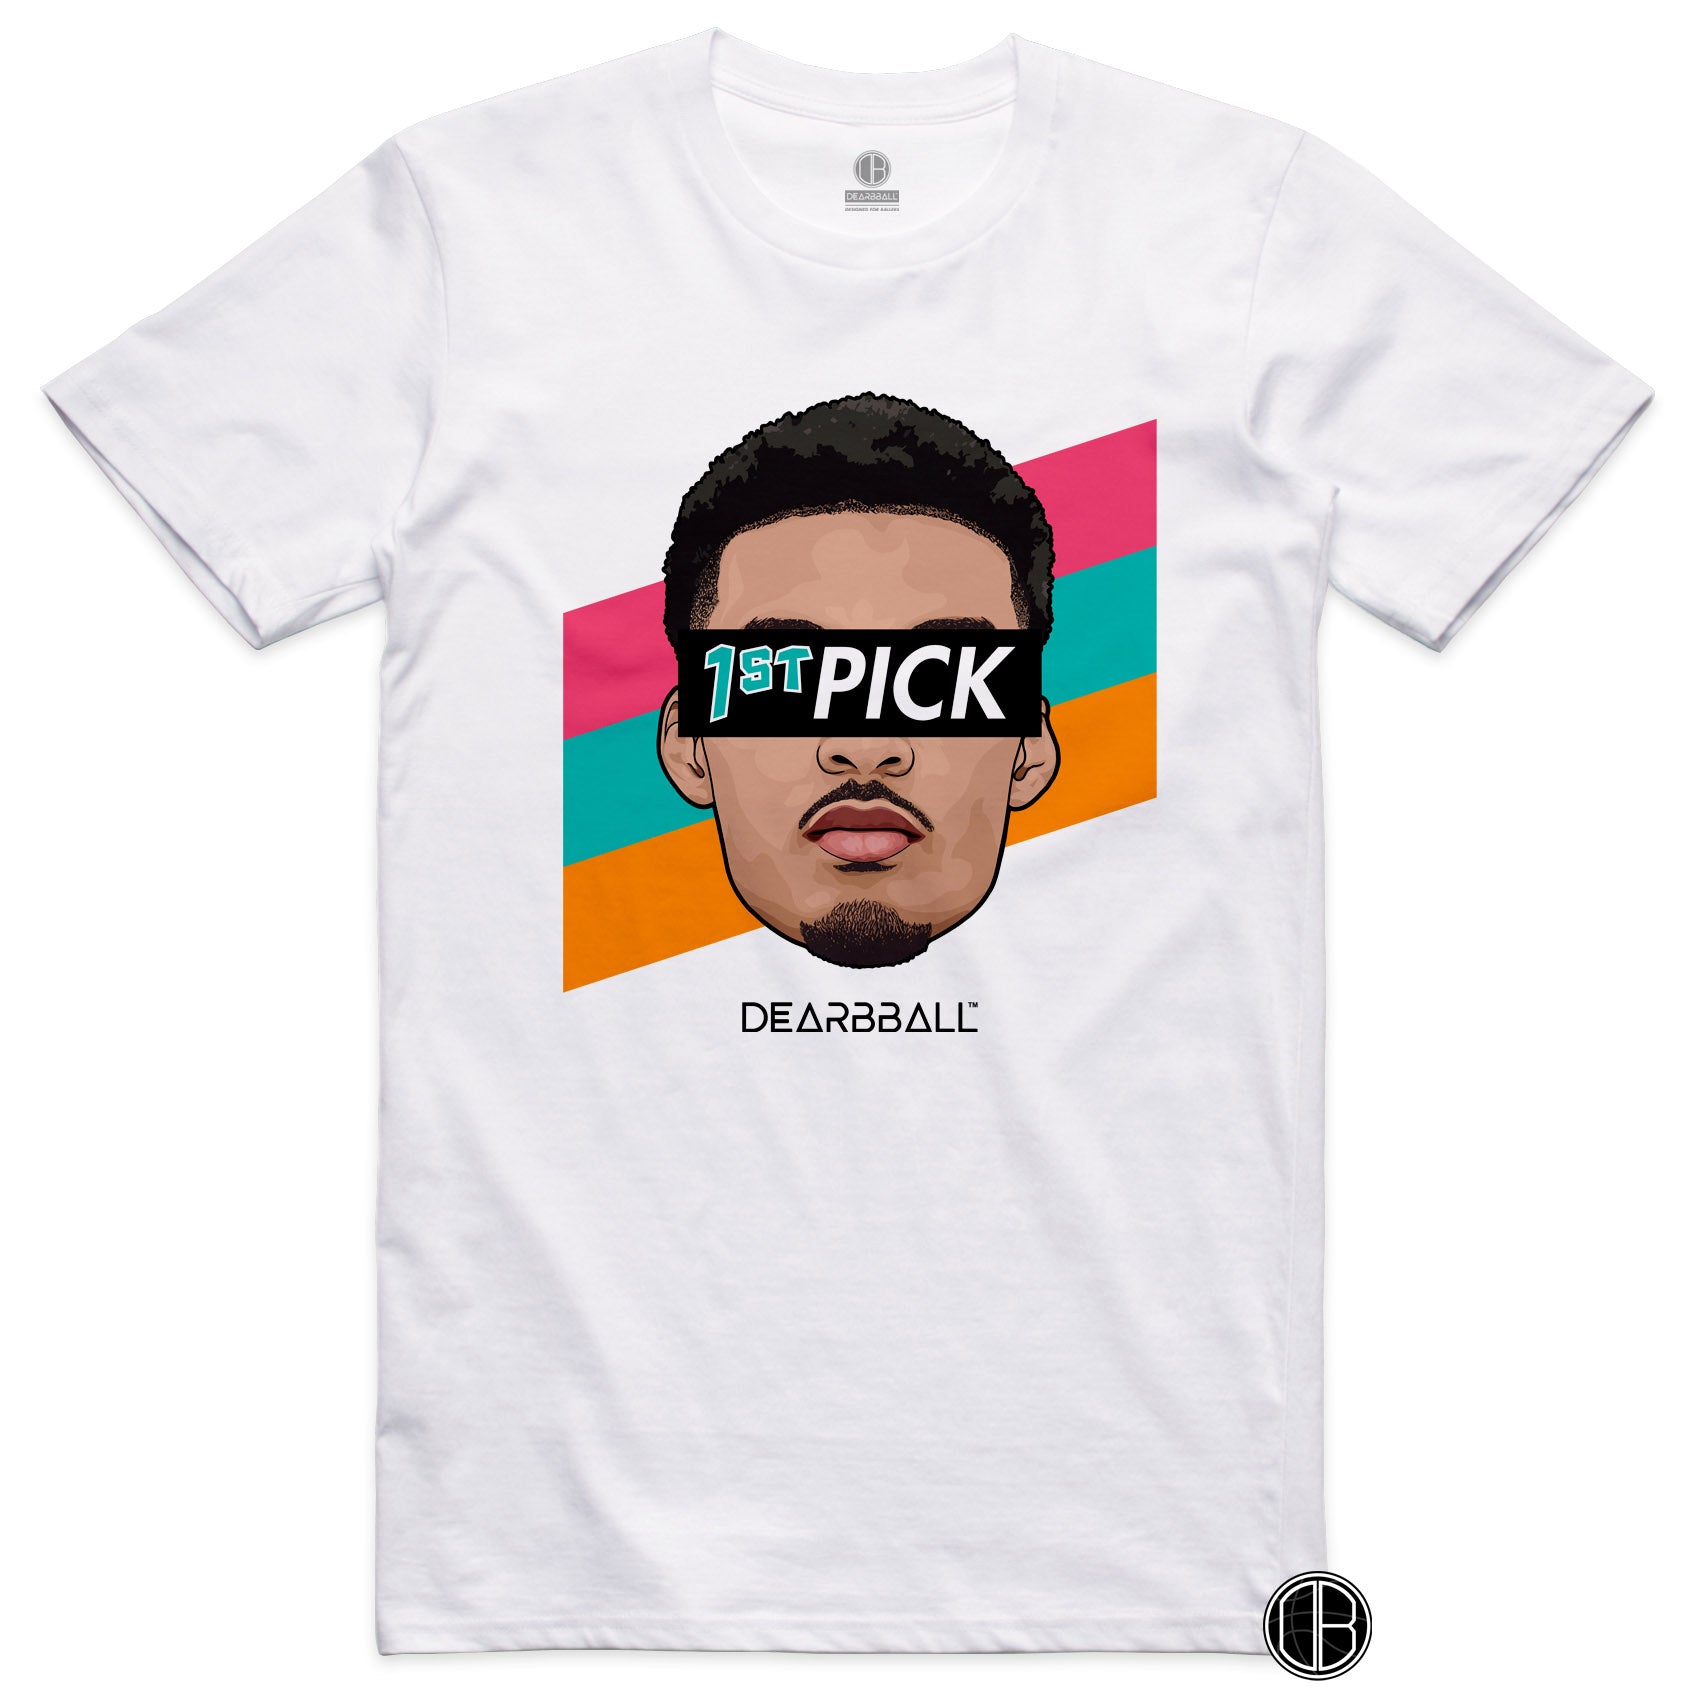 [CHILD] DearBBall T-Shirt - 1st PICK Limited Edition